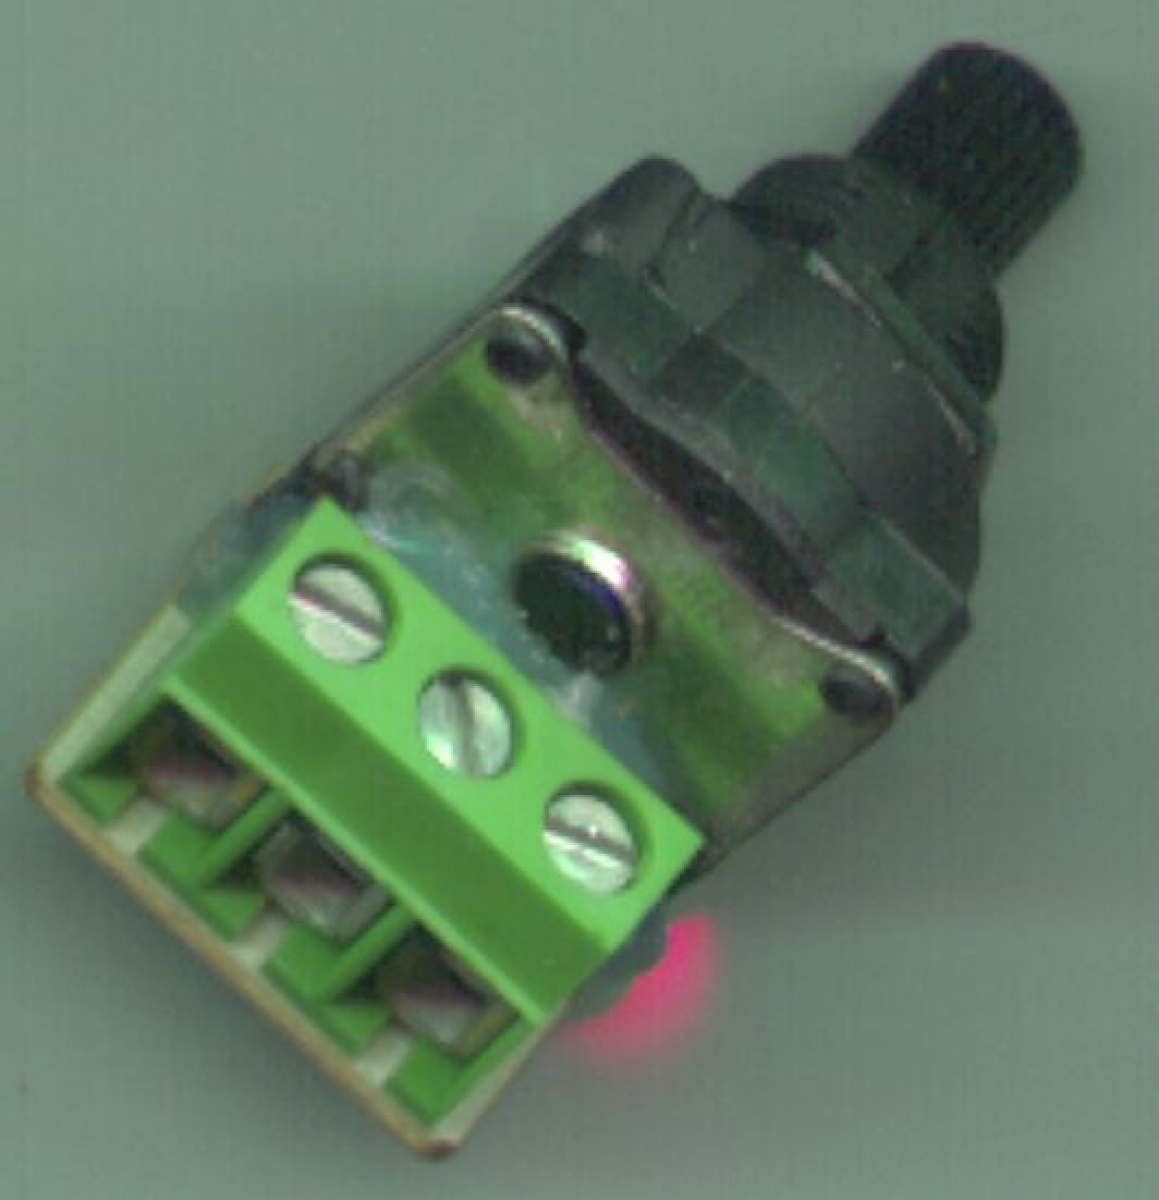 RelcoPS1/470K RQ8189 6x16 potentiometer with screw terminals for various dimmer transformersArticle-No: RQ8189L